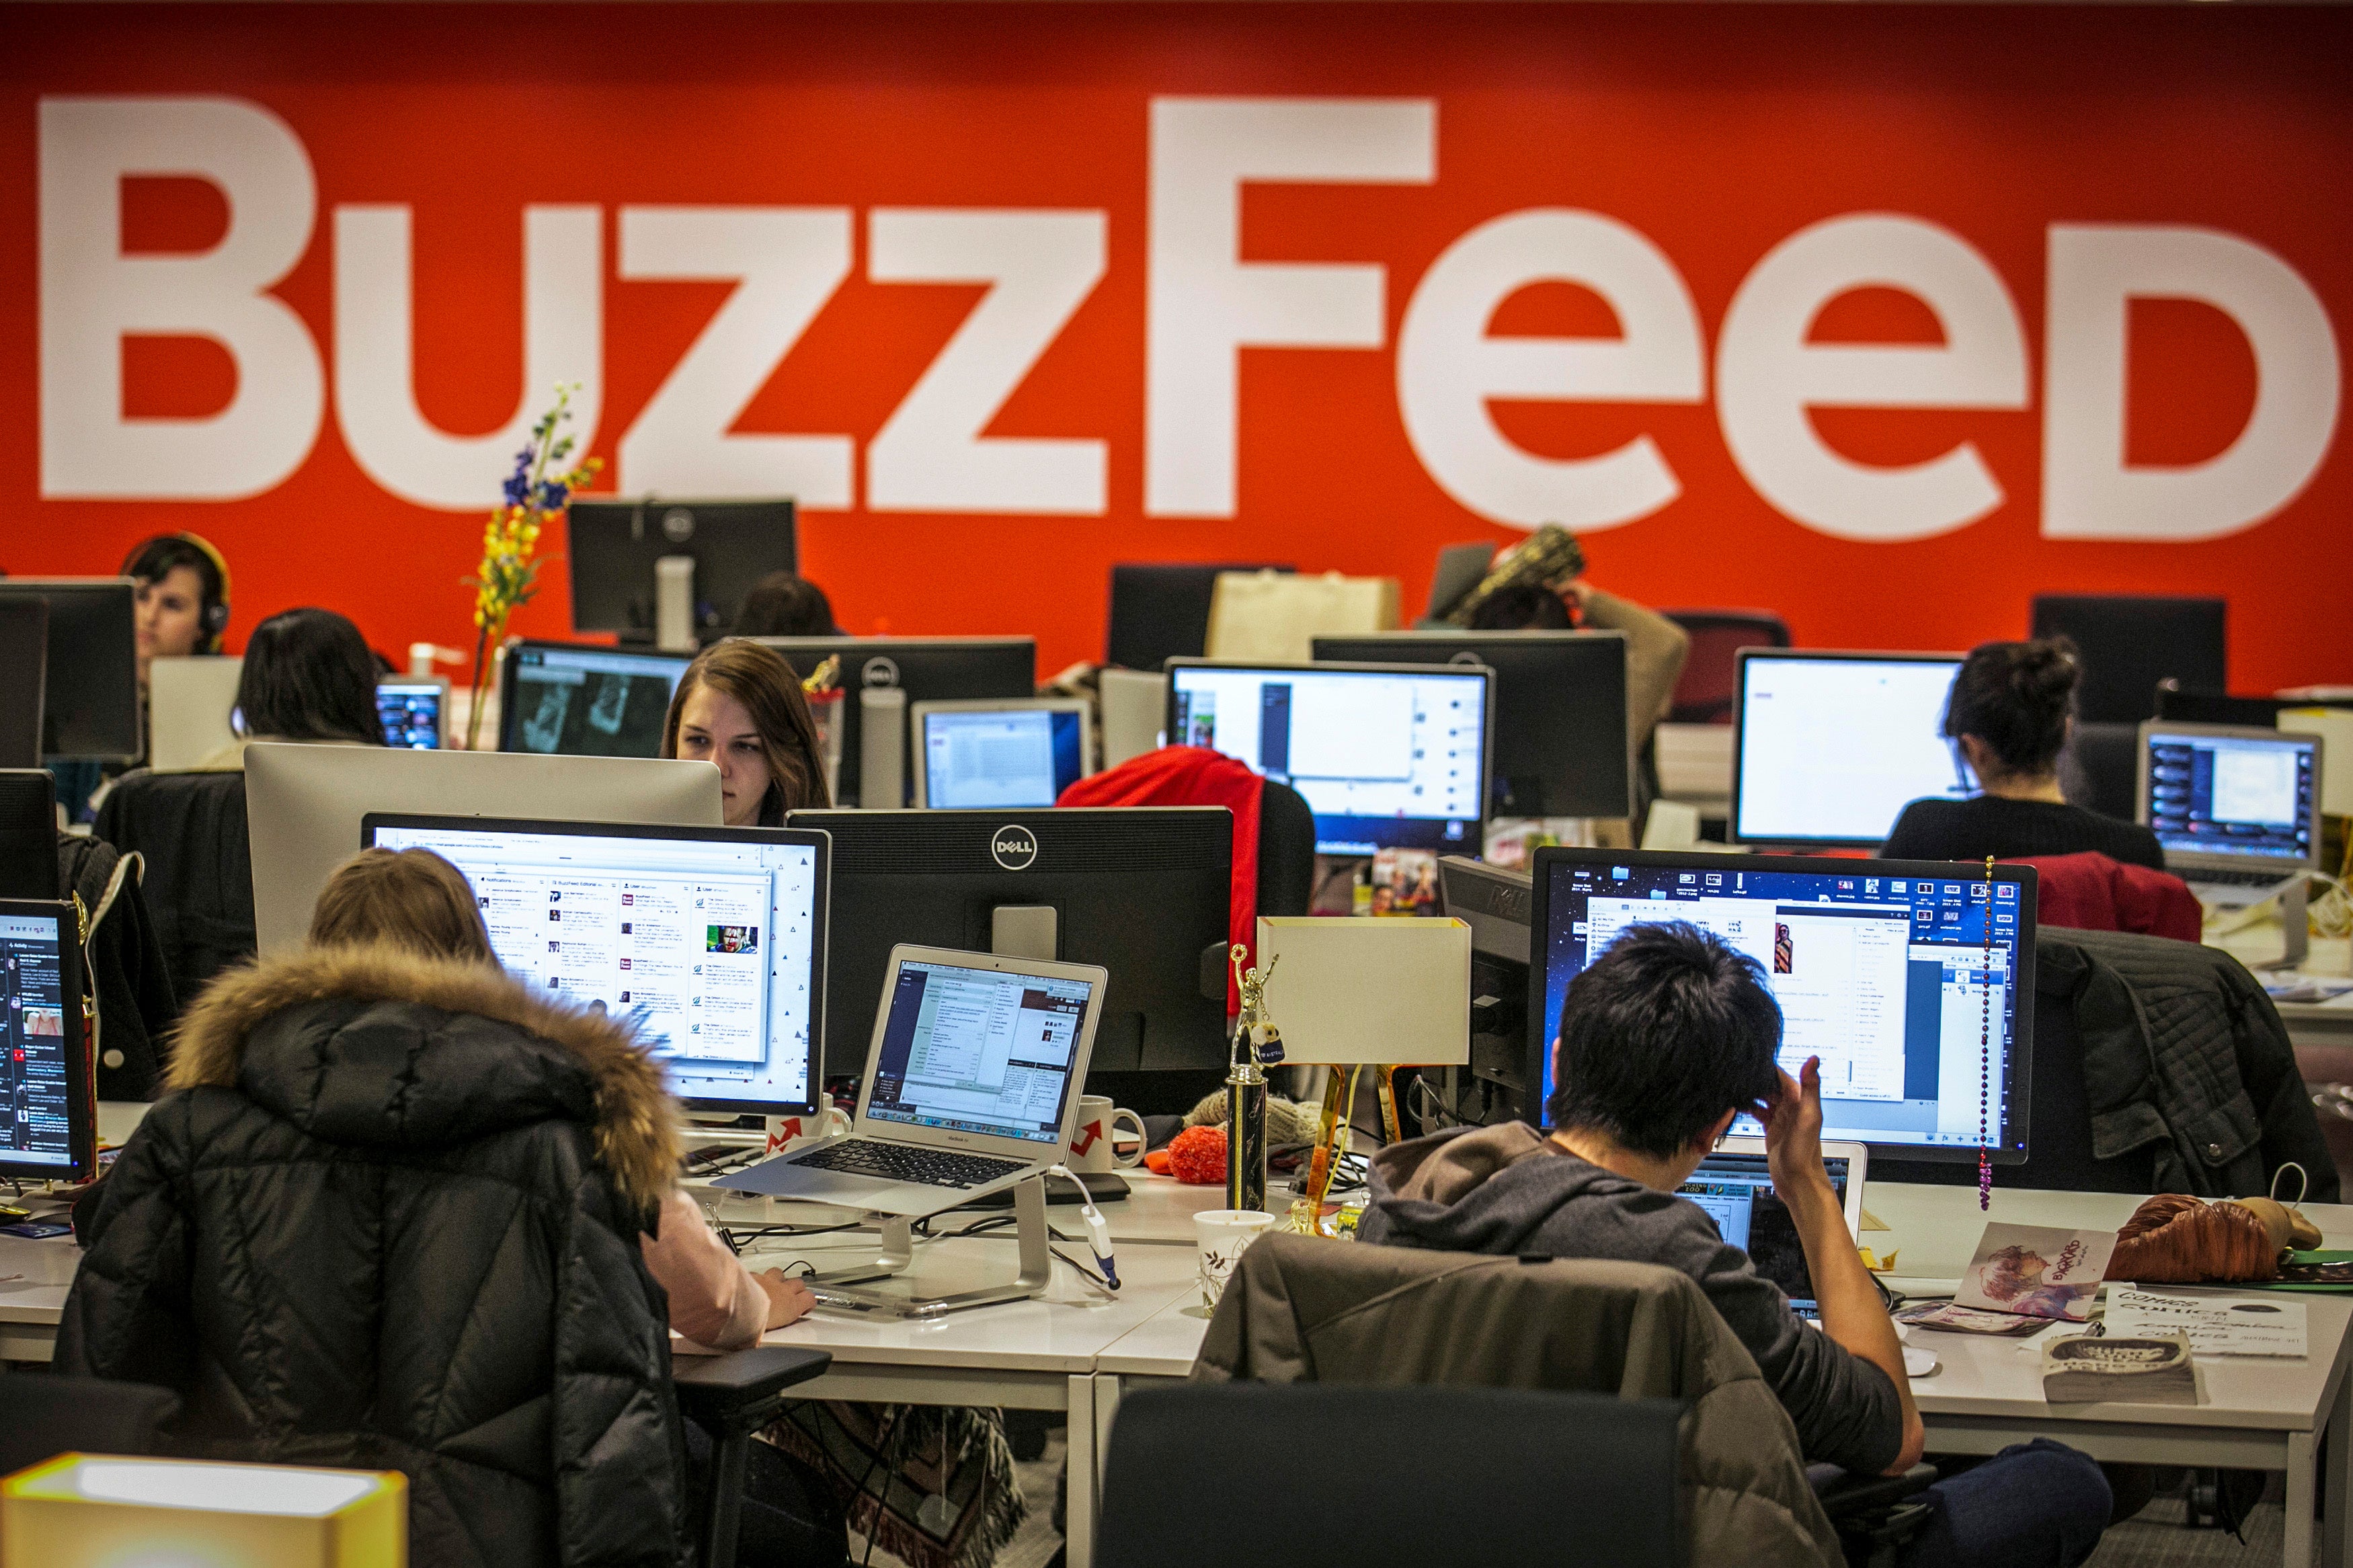 News agency says it is appealing against damning libel judgment in Buzzfeed 'king of bullshit news' case